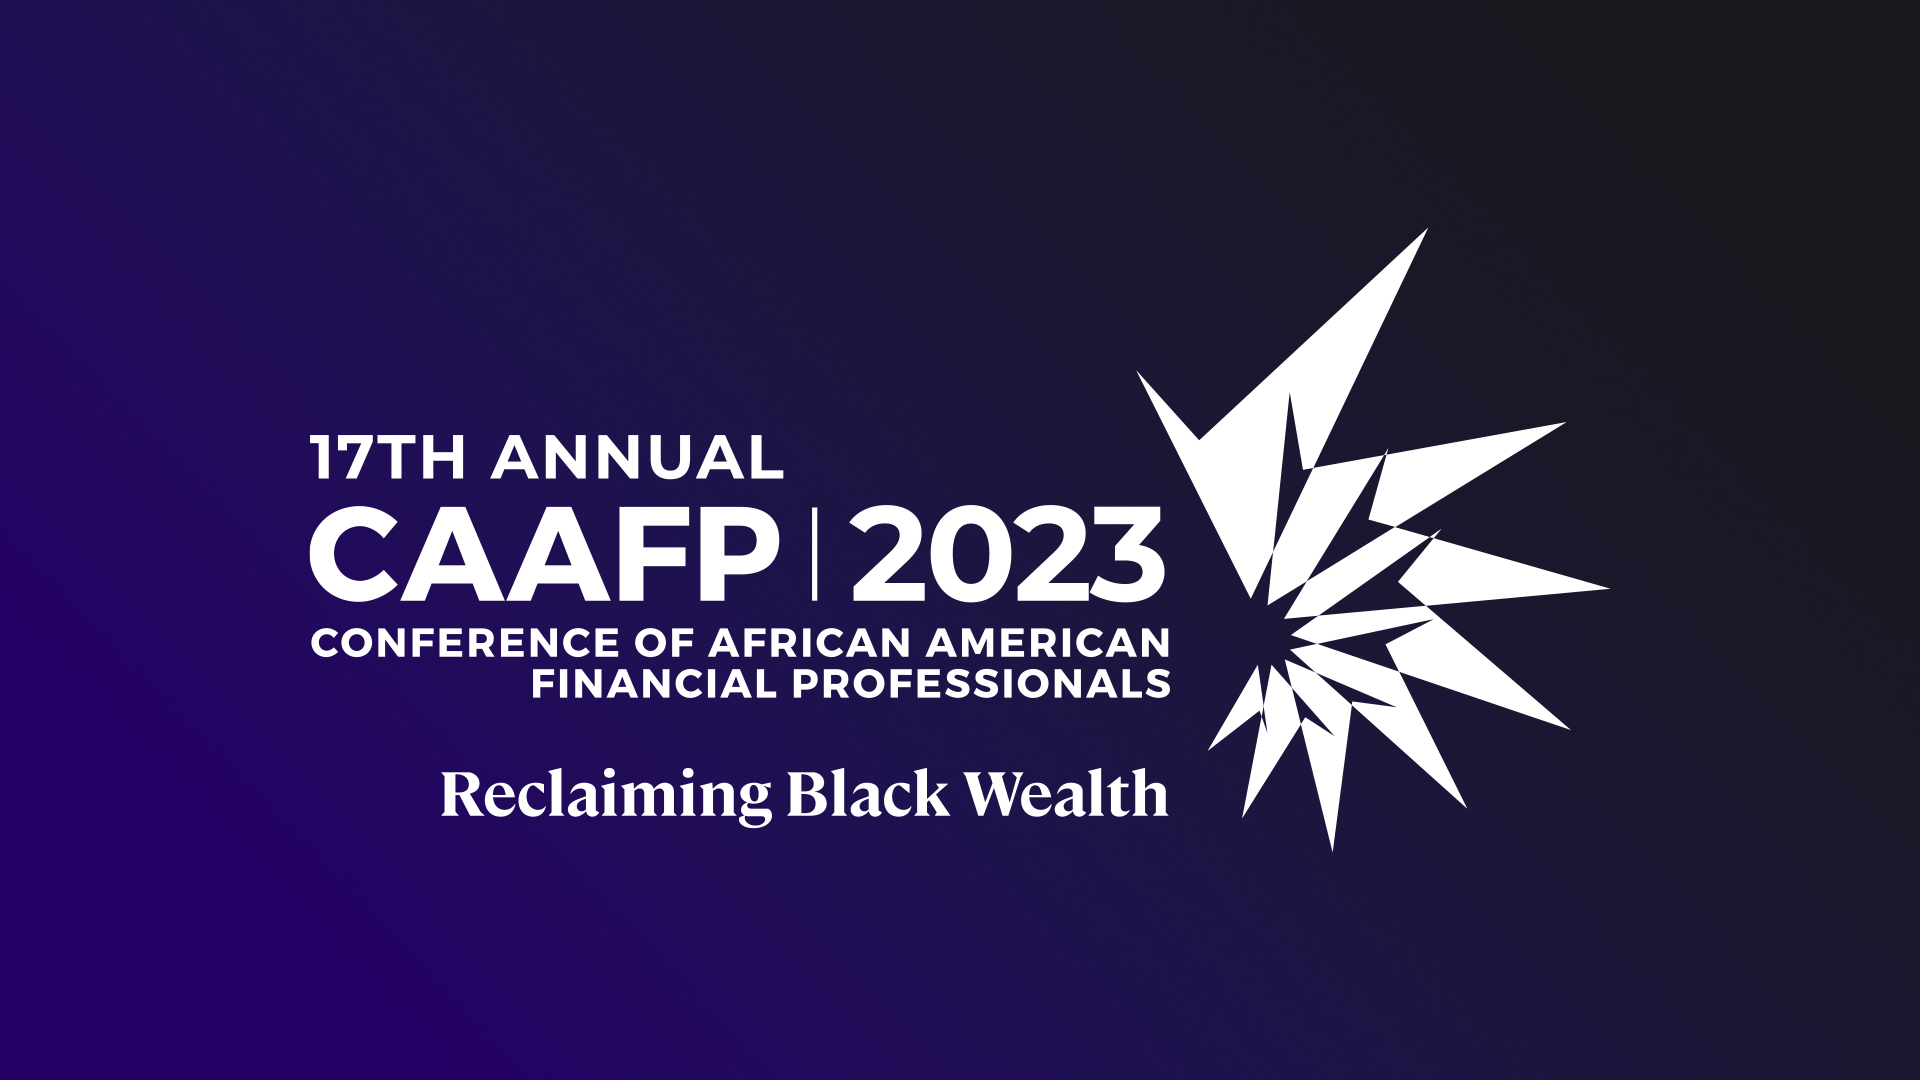 17th Annual Conference of African American Financial Professionals to